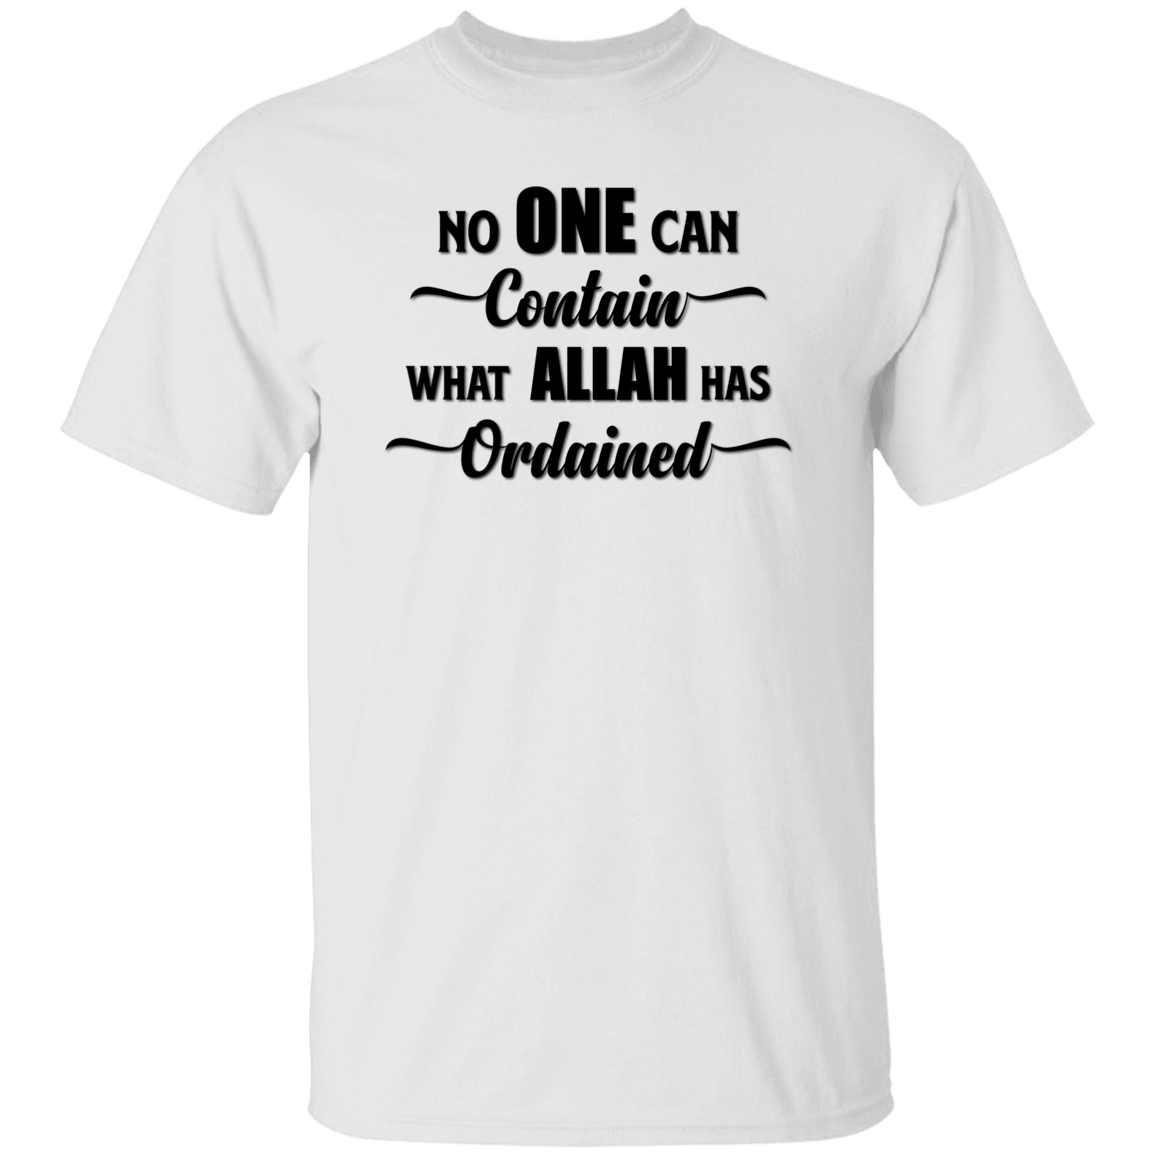 NO ONE CAN CONTAIN WHAT ALLAH HAS ORDAINED  T-Shirt (MORE COLOR OPTIONS)